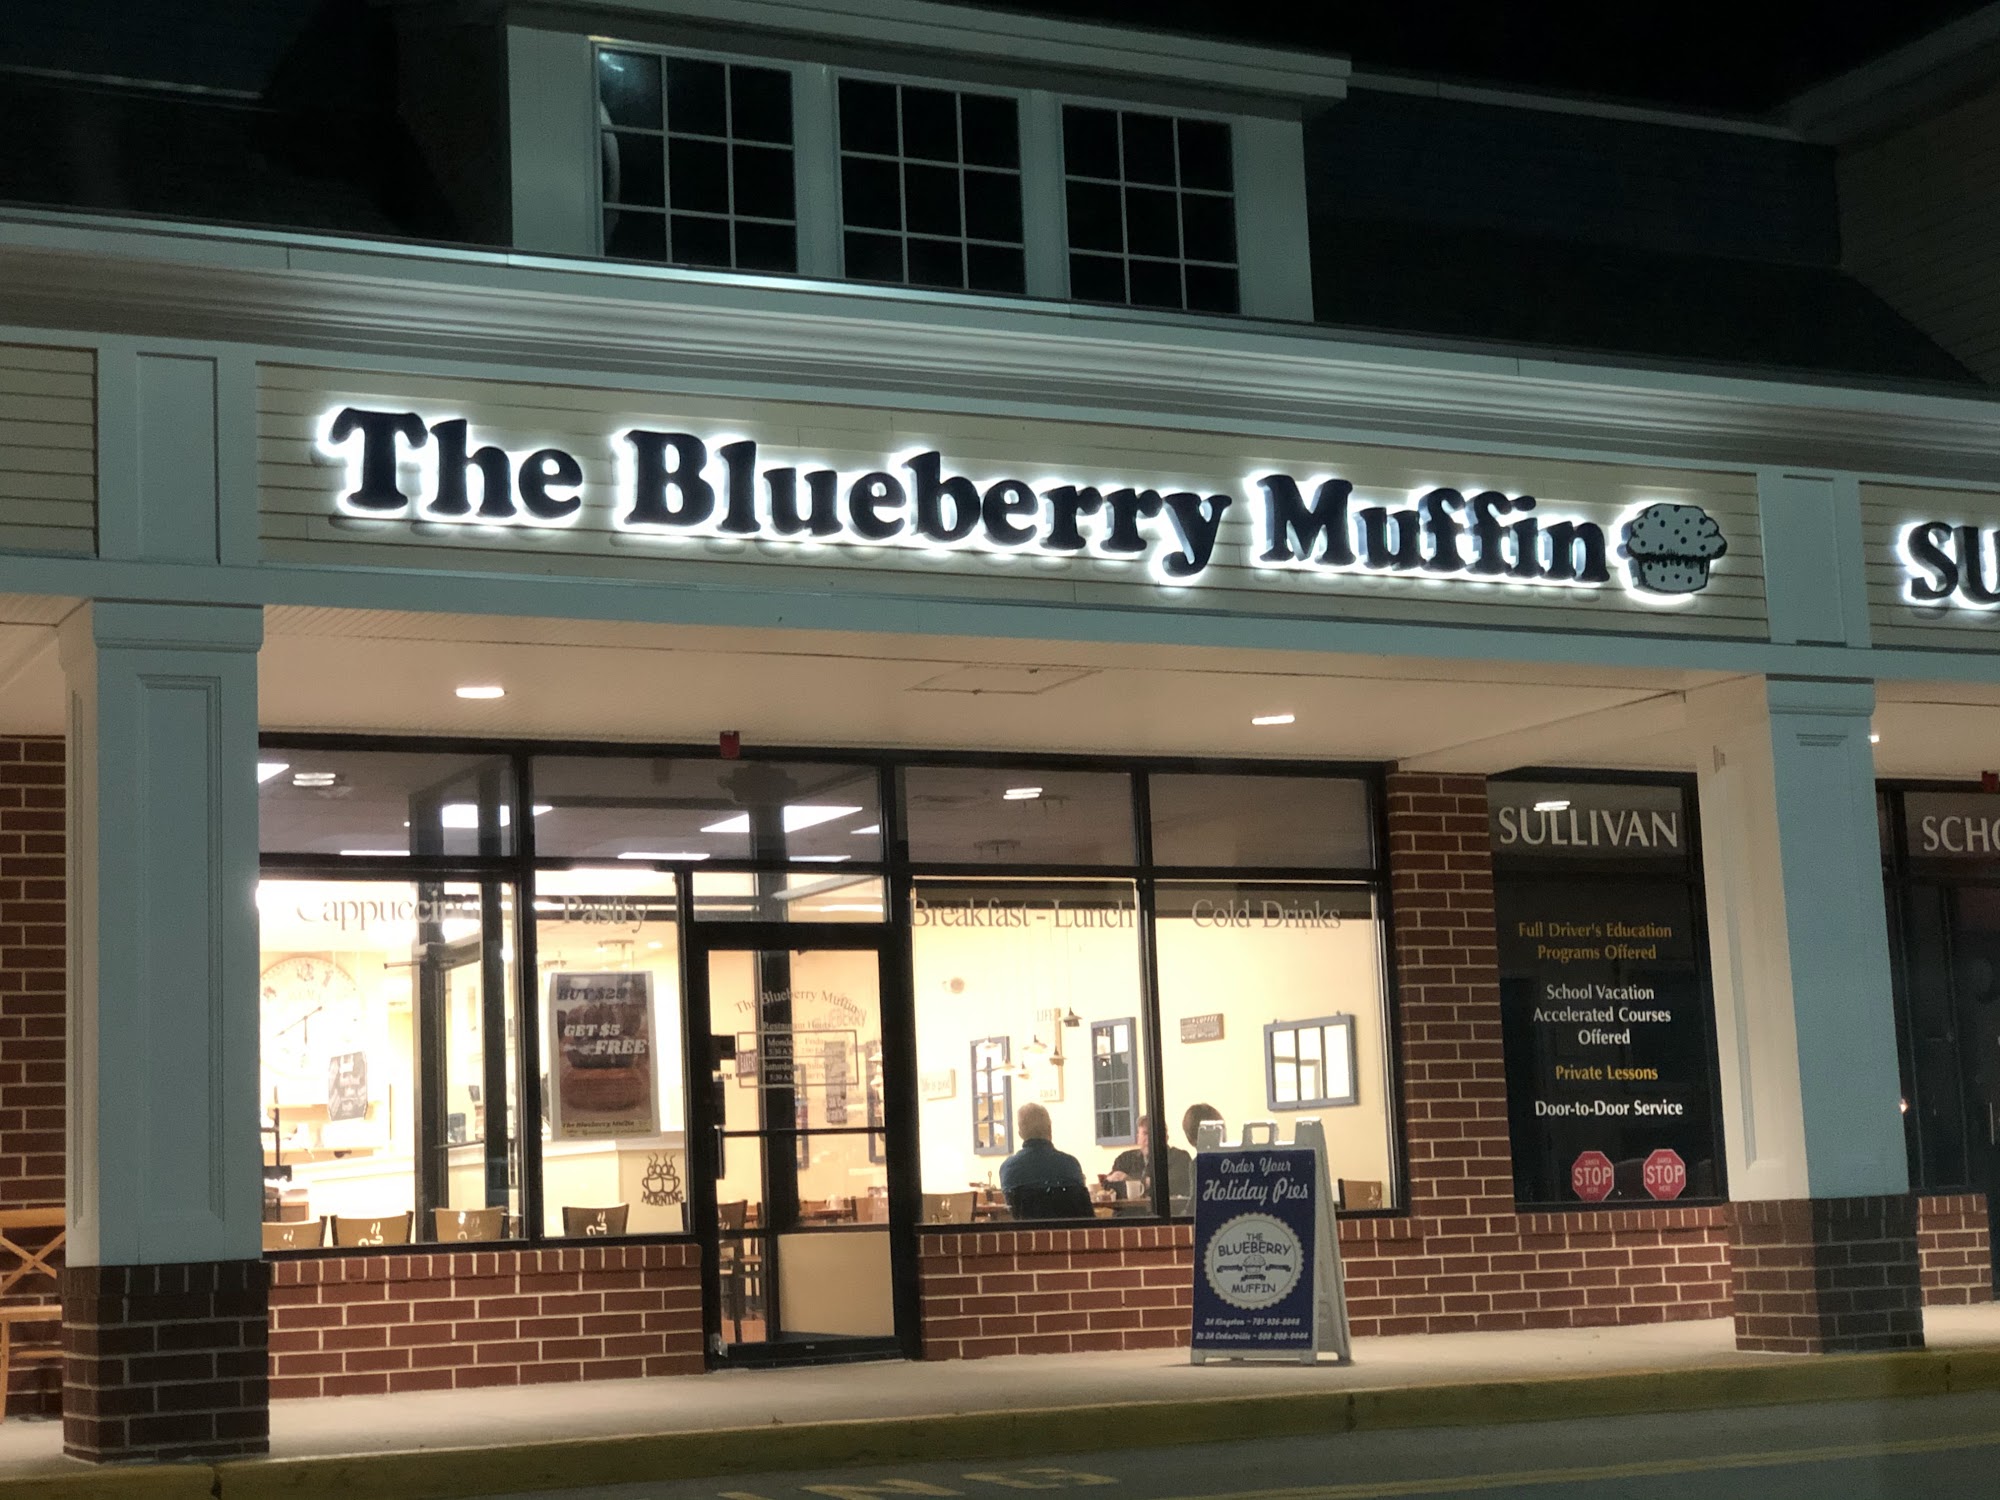 The Blueberry Muffin Restaurant: Kingston MA